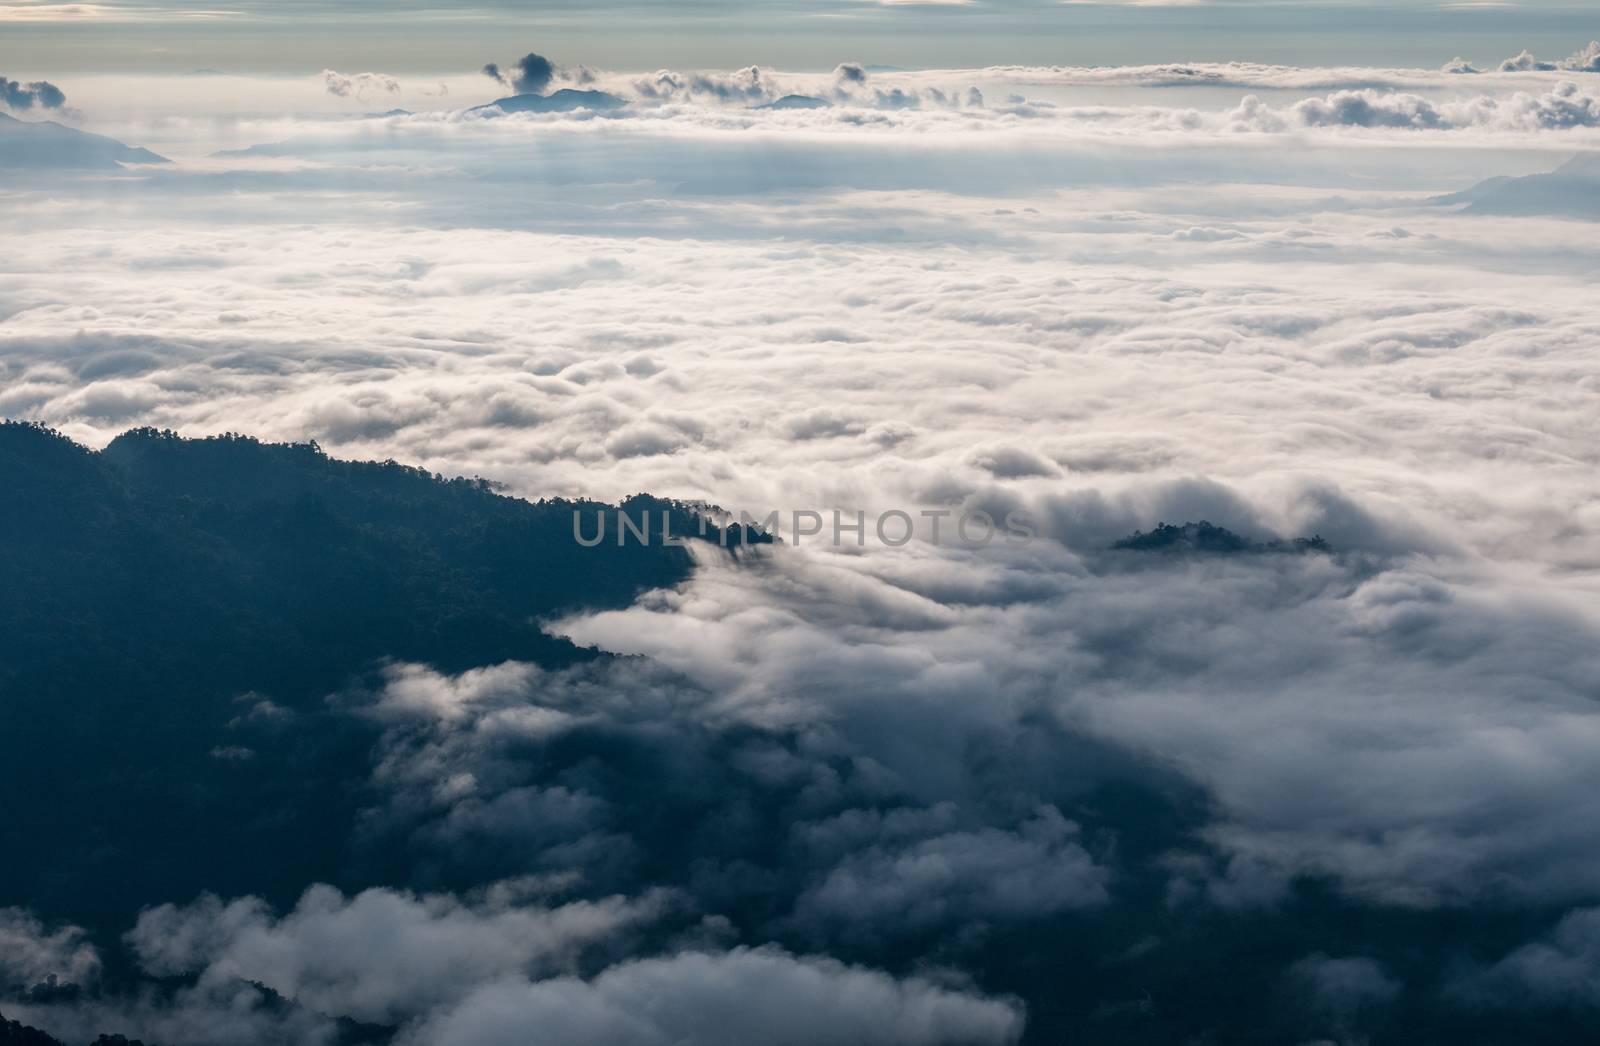 Mountain and cloudy sky landscape